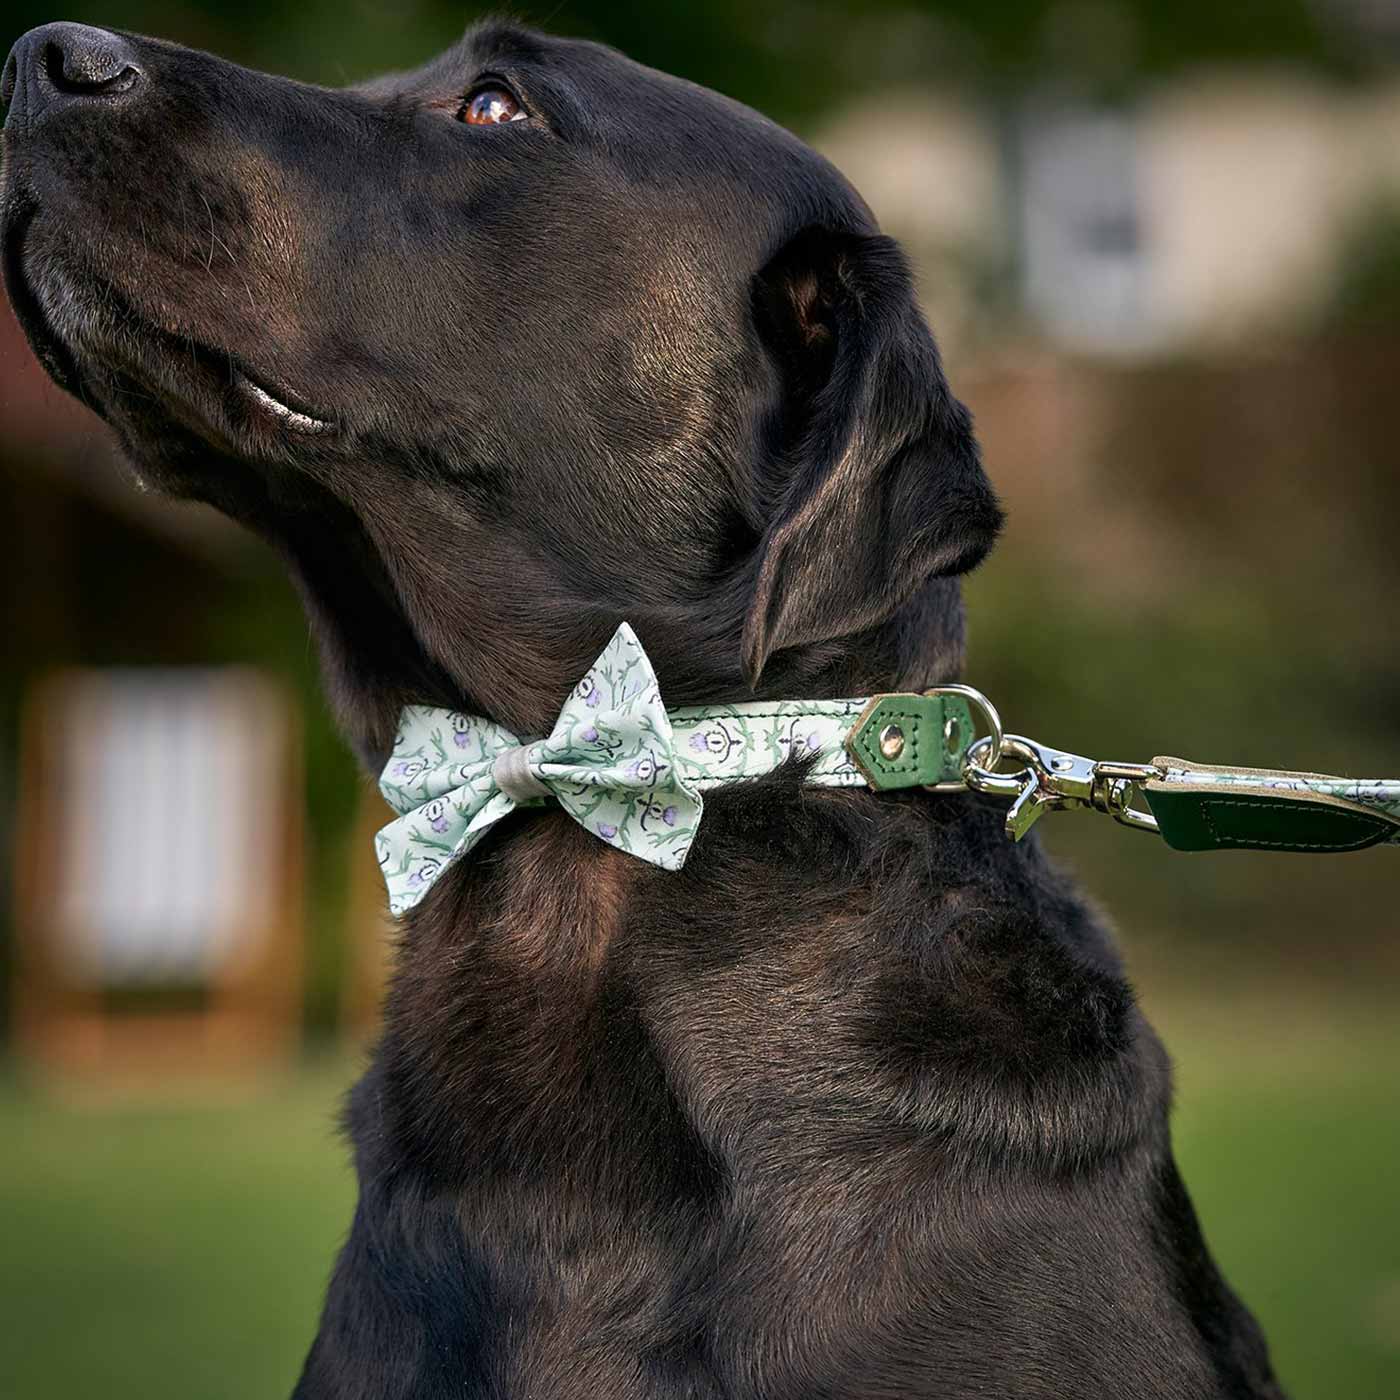 [colour:stag] Set & accessorise your pooch ready for a stylish dog walk with Hiro + Wolf X L&L Dog Bow Tie, the perfect dog walking accessory! Made using strong webbing lining to provide extra strength! Available in 3 stylish designs and one sizes at Lords & Labradors